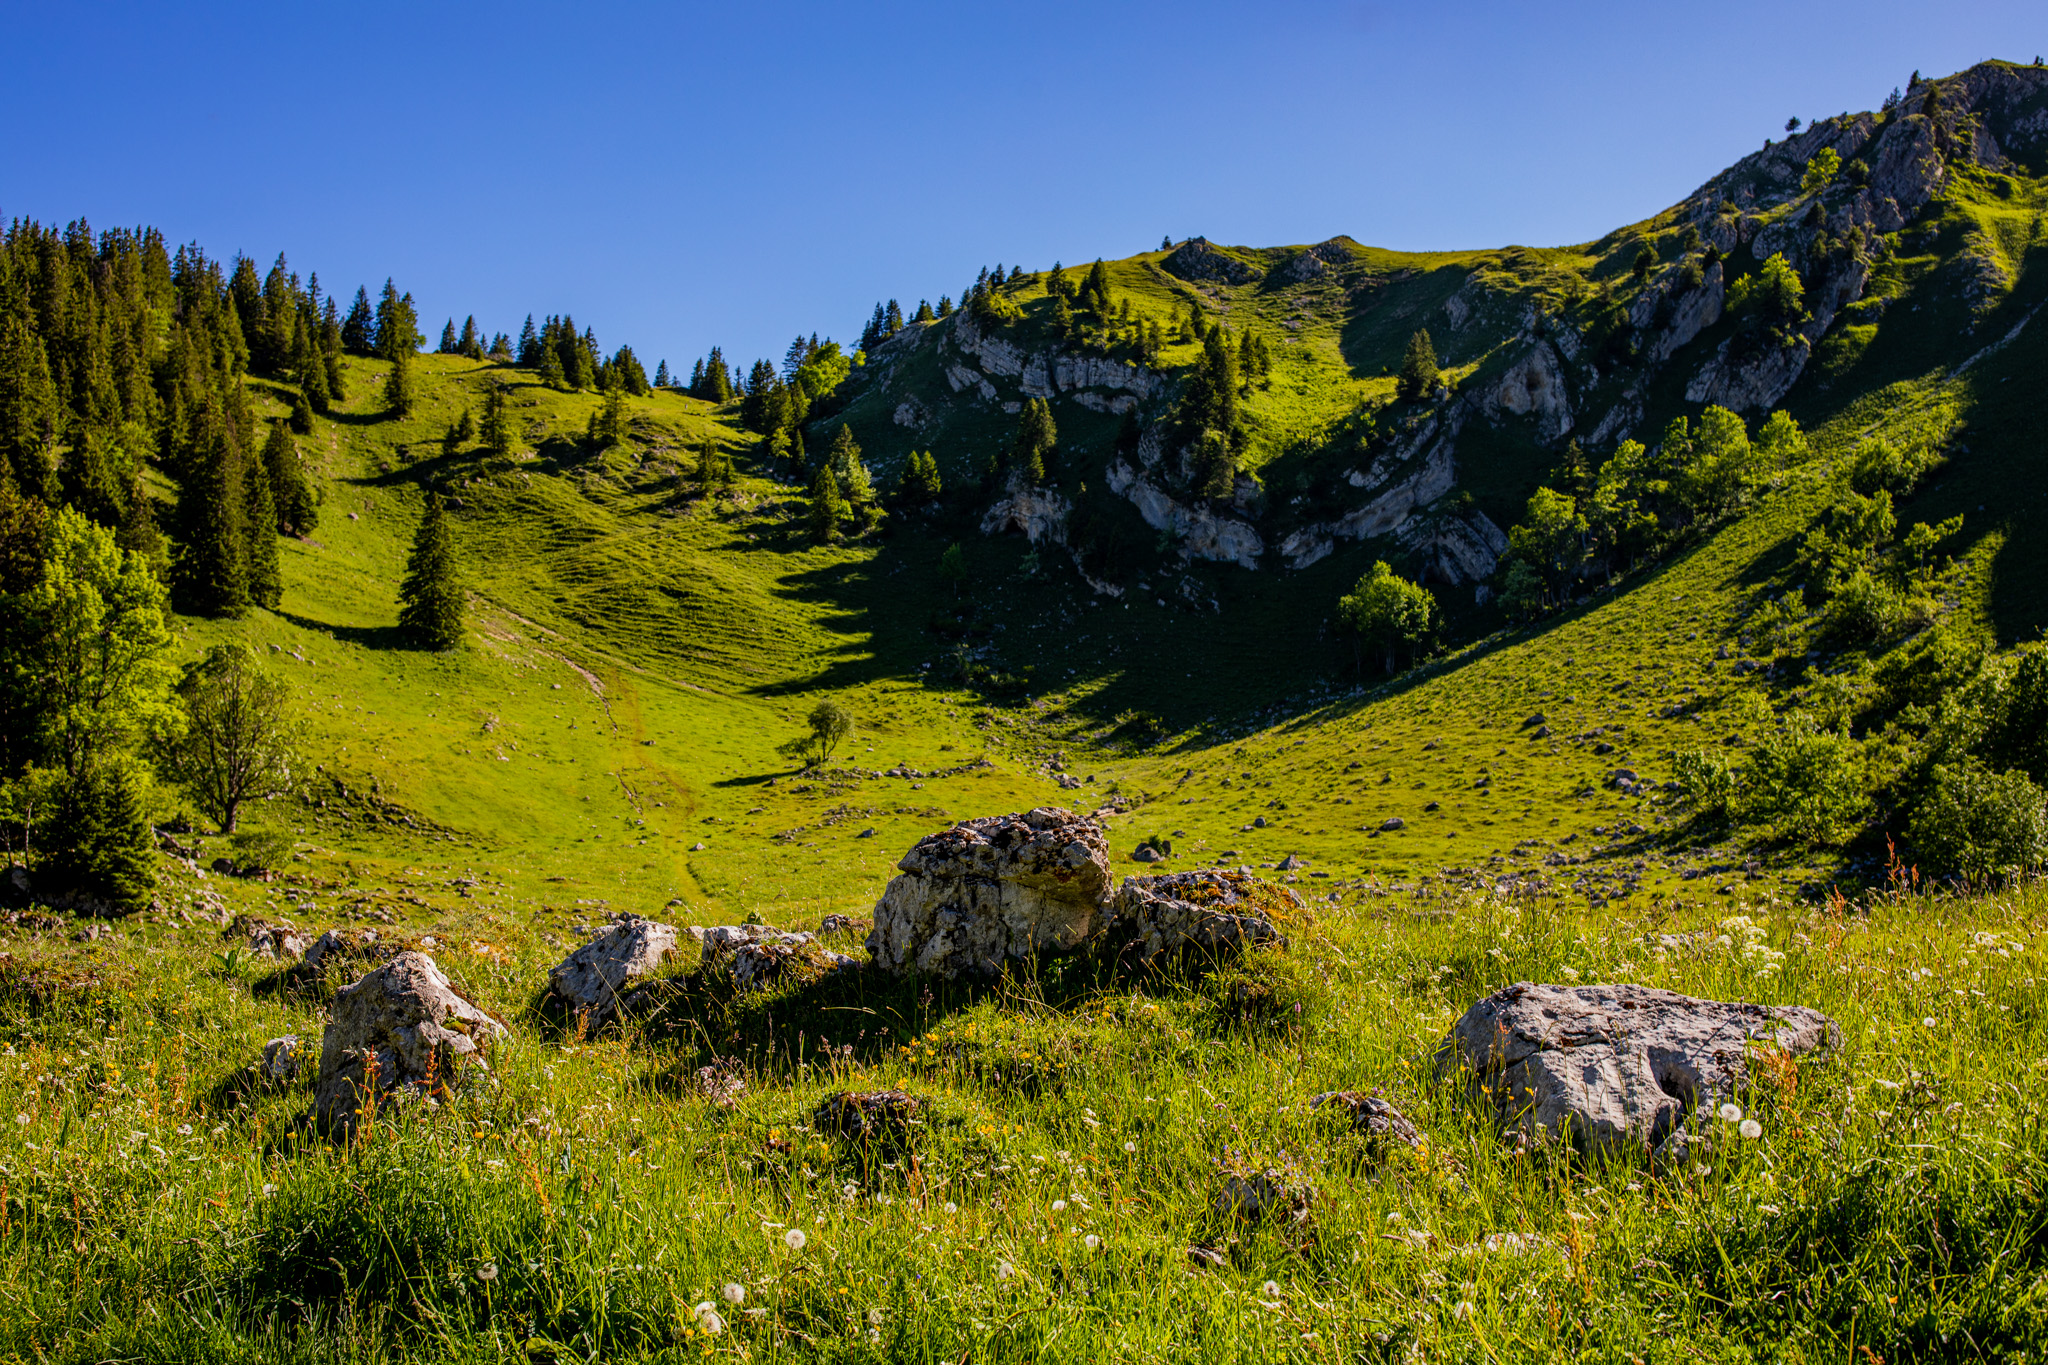 General 2048x1365 photography outdoors nature mountains trees rocks forest greenery grass field cliff